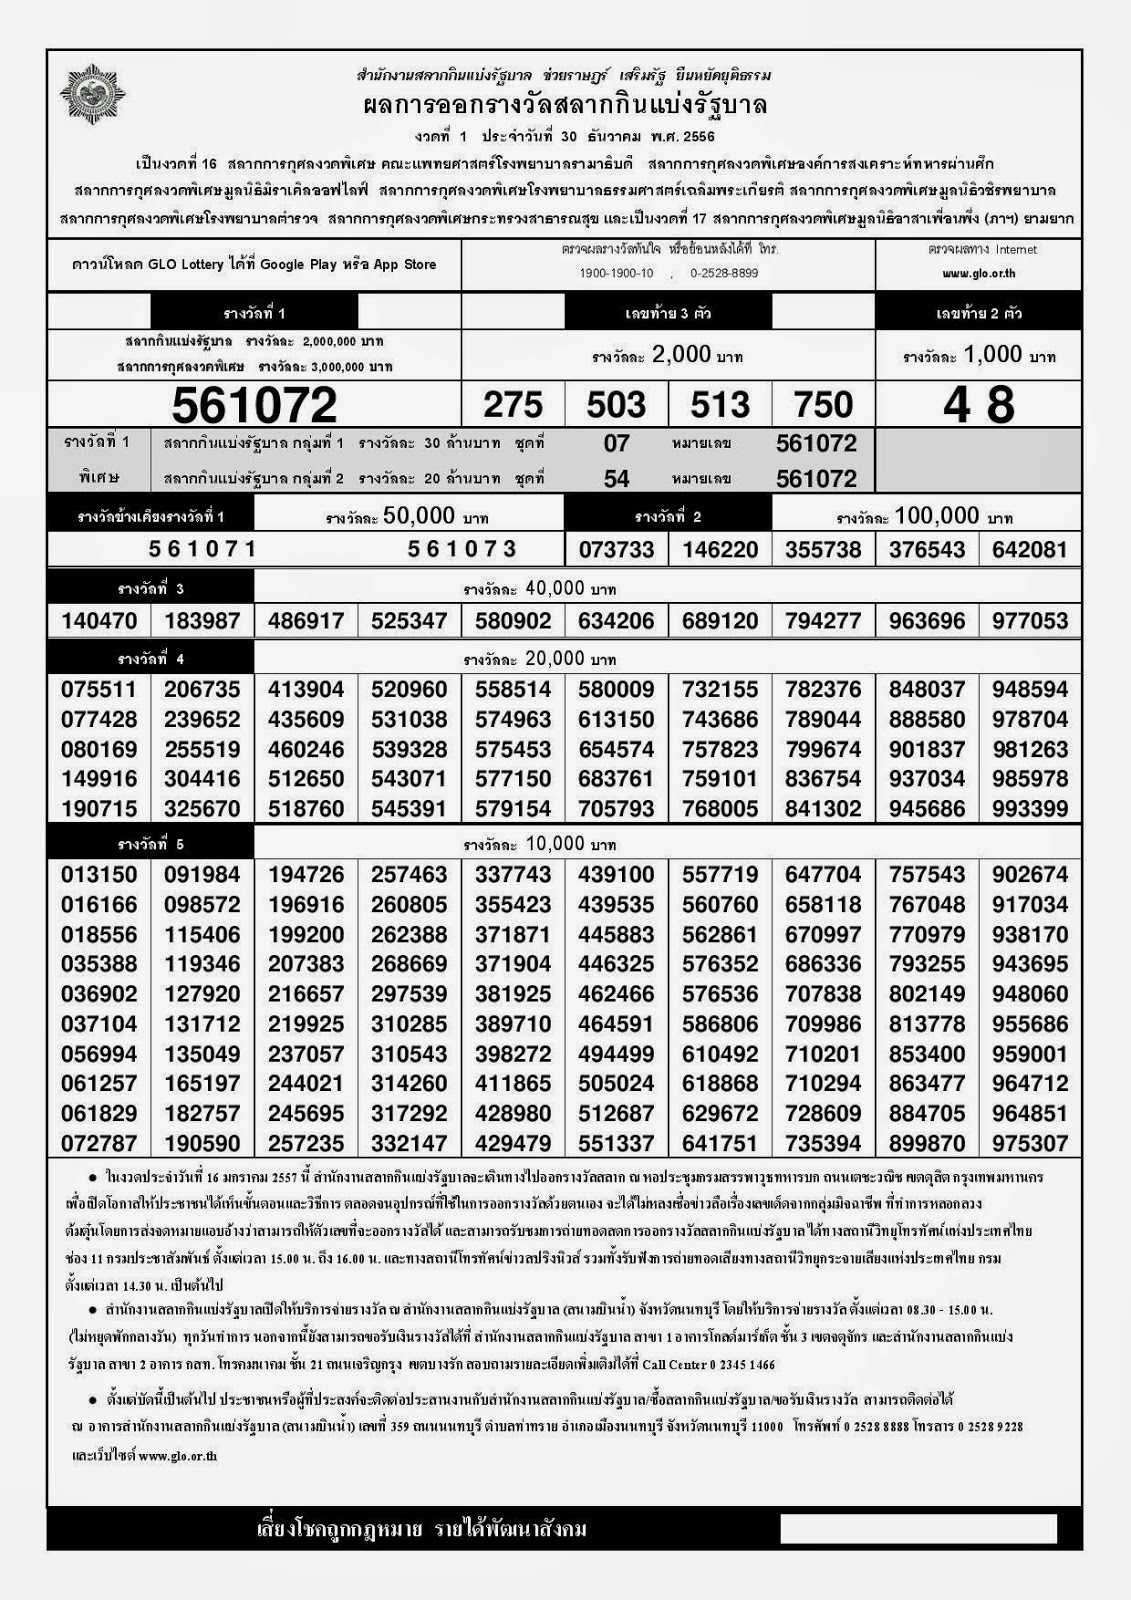 france lotto history results1131 x 1600